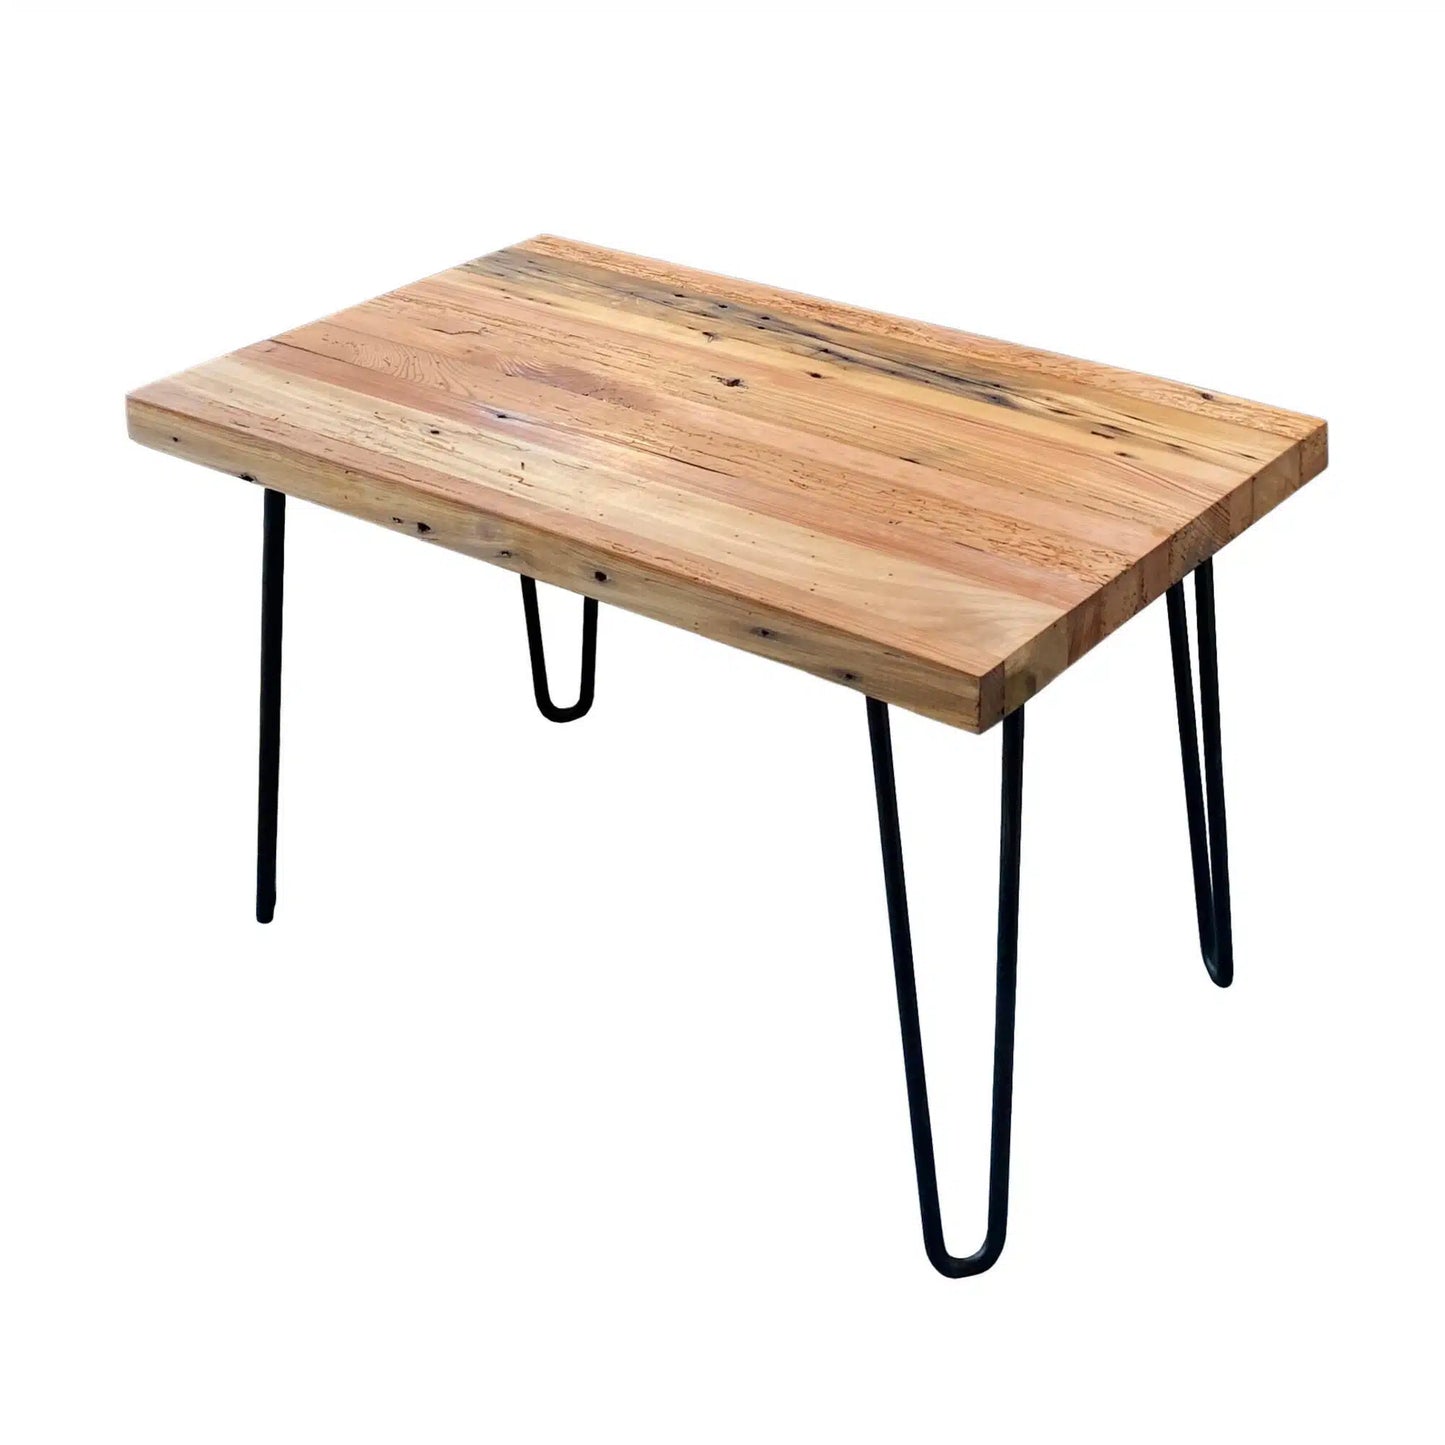 A reclaimed wood coffee table with hair pin legs in a wider view. The view shows variations in the wood and rustic characteristics. The lacquer finish shown adds a slight shine.